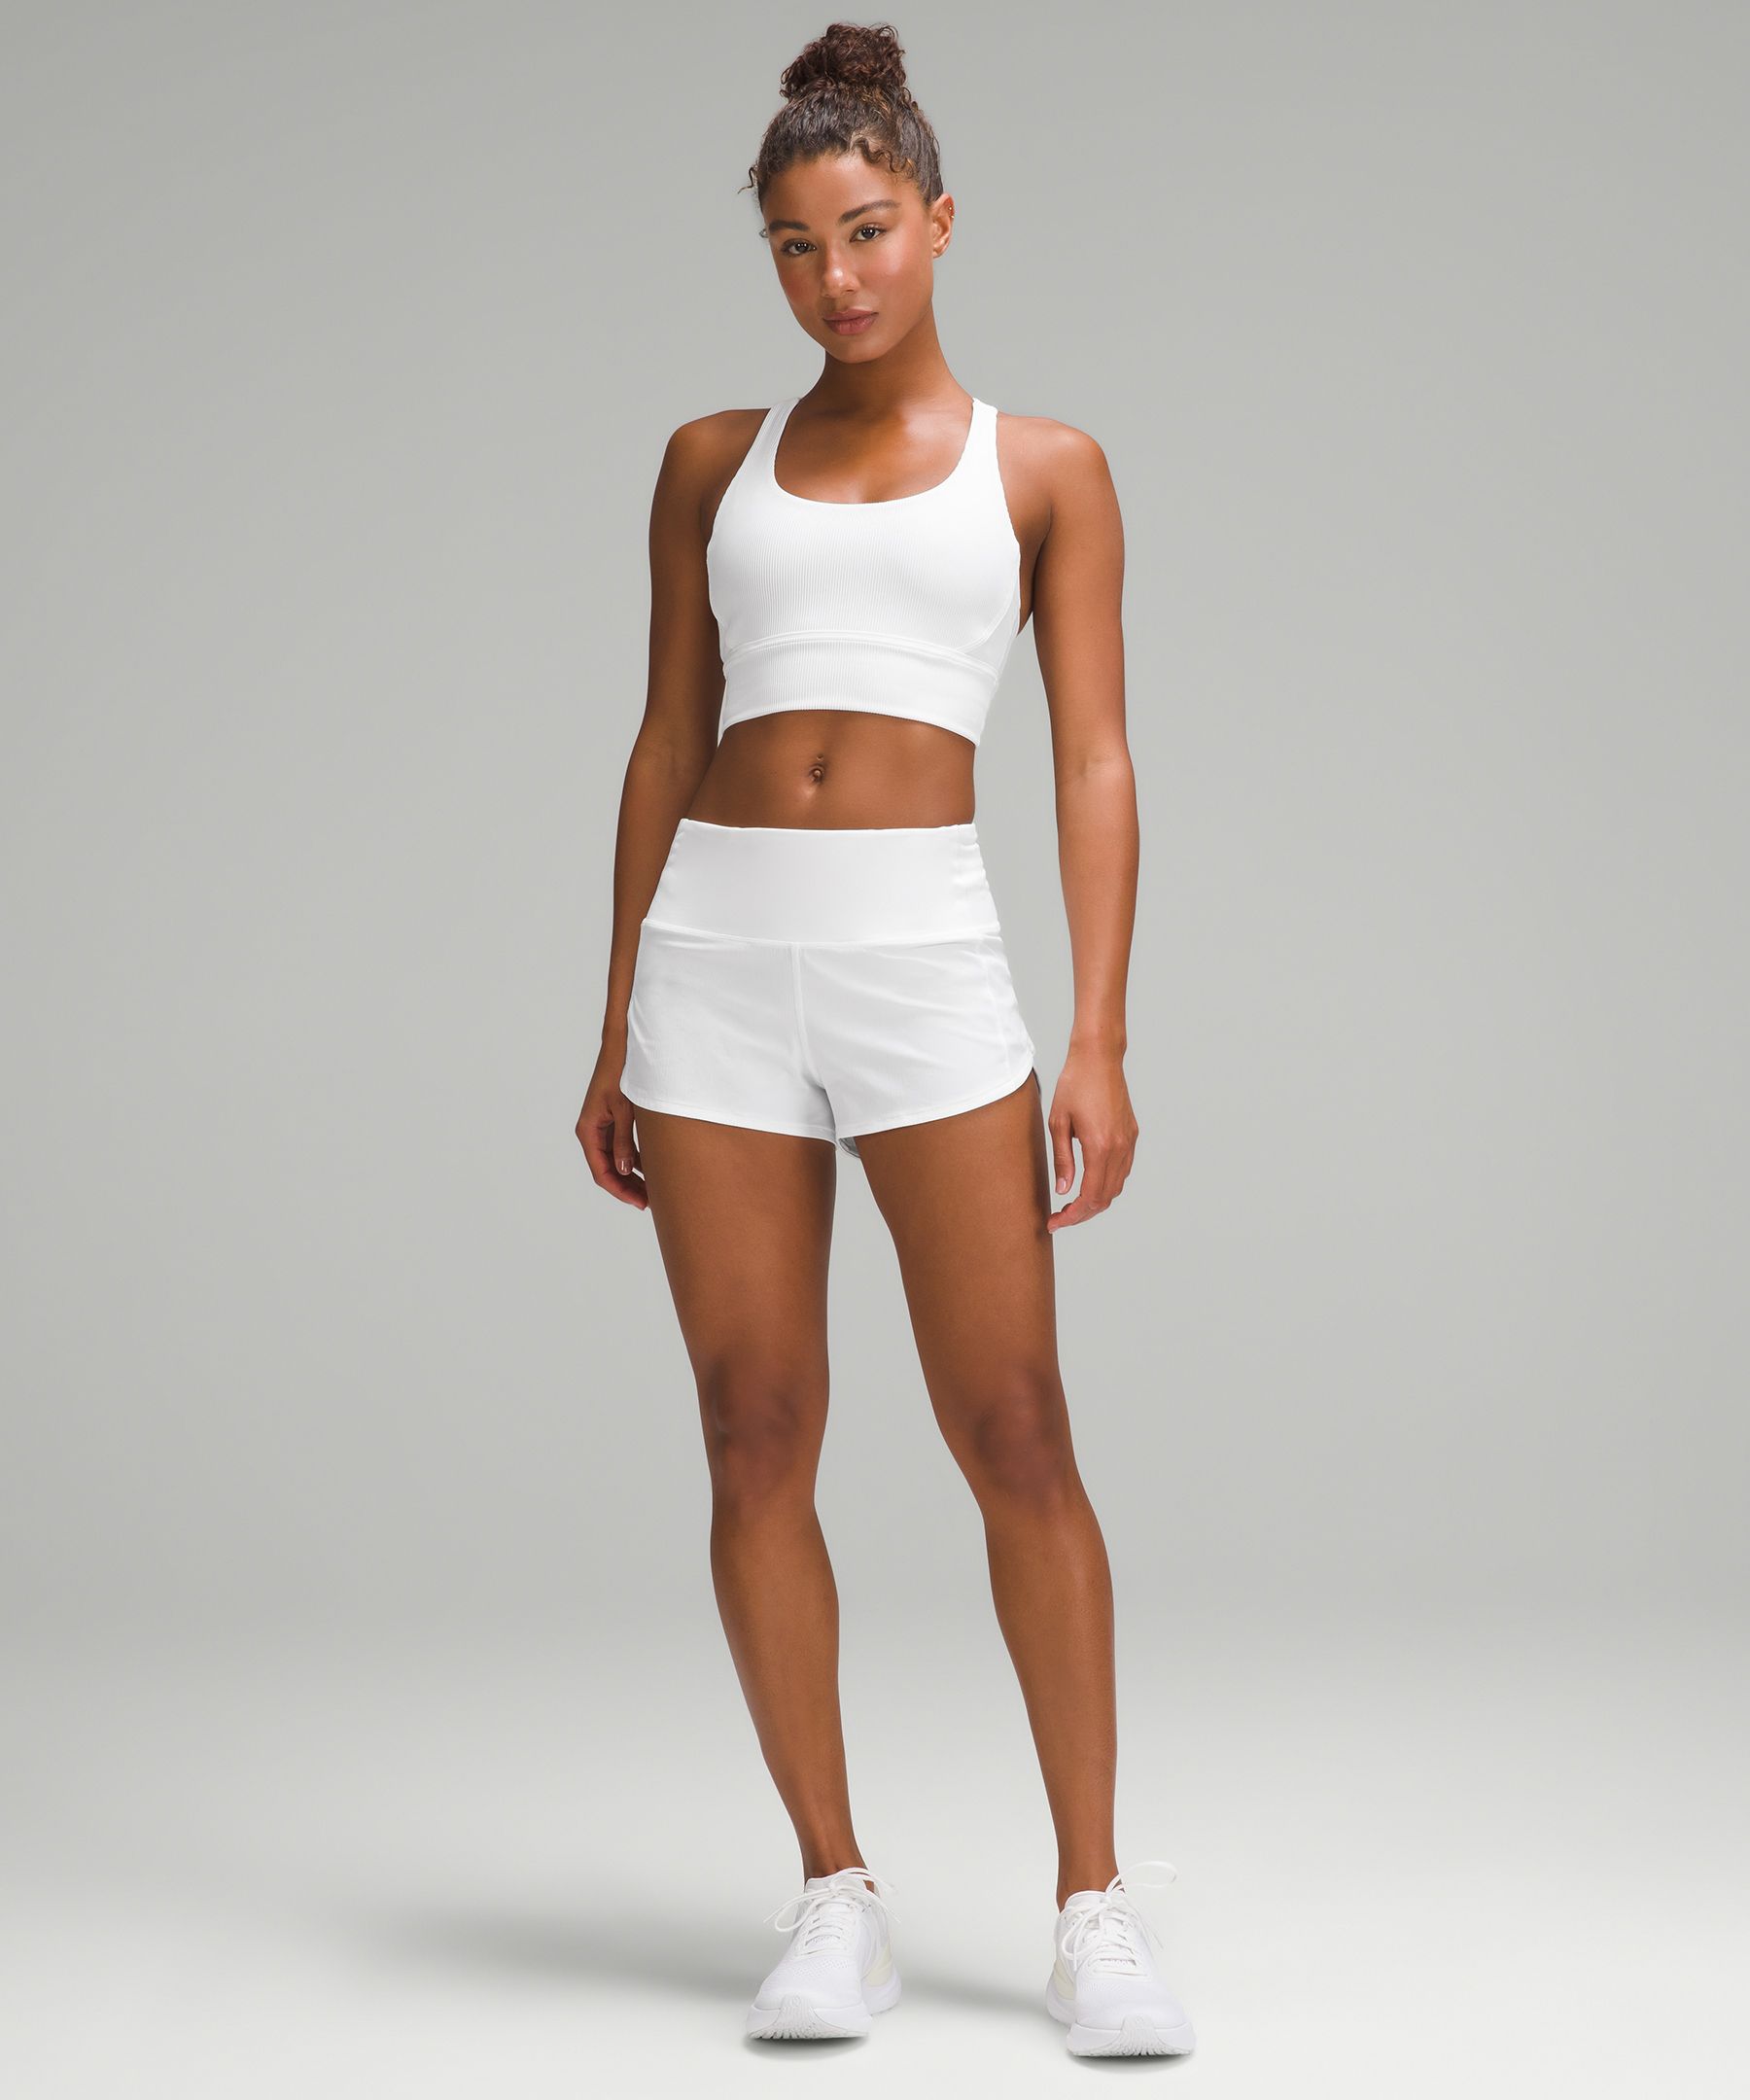 Speed Up High-Rise Lined Short 2.5, Shorts